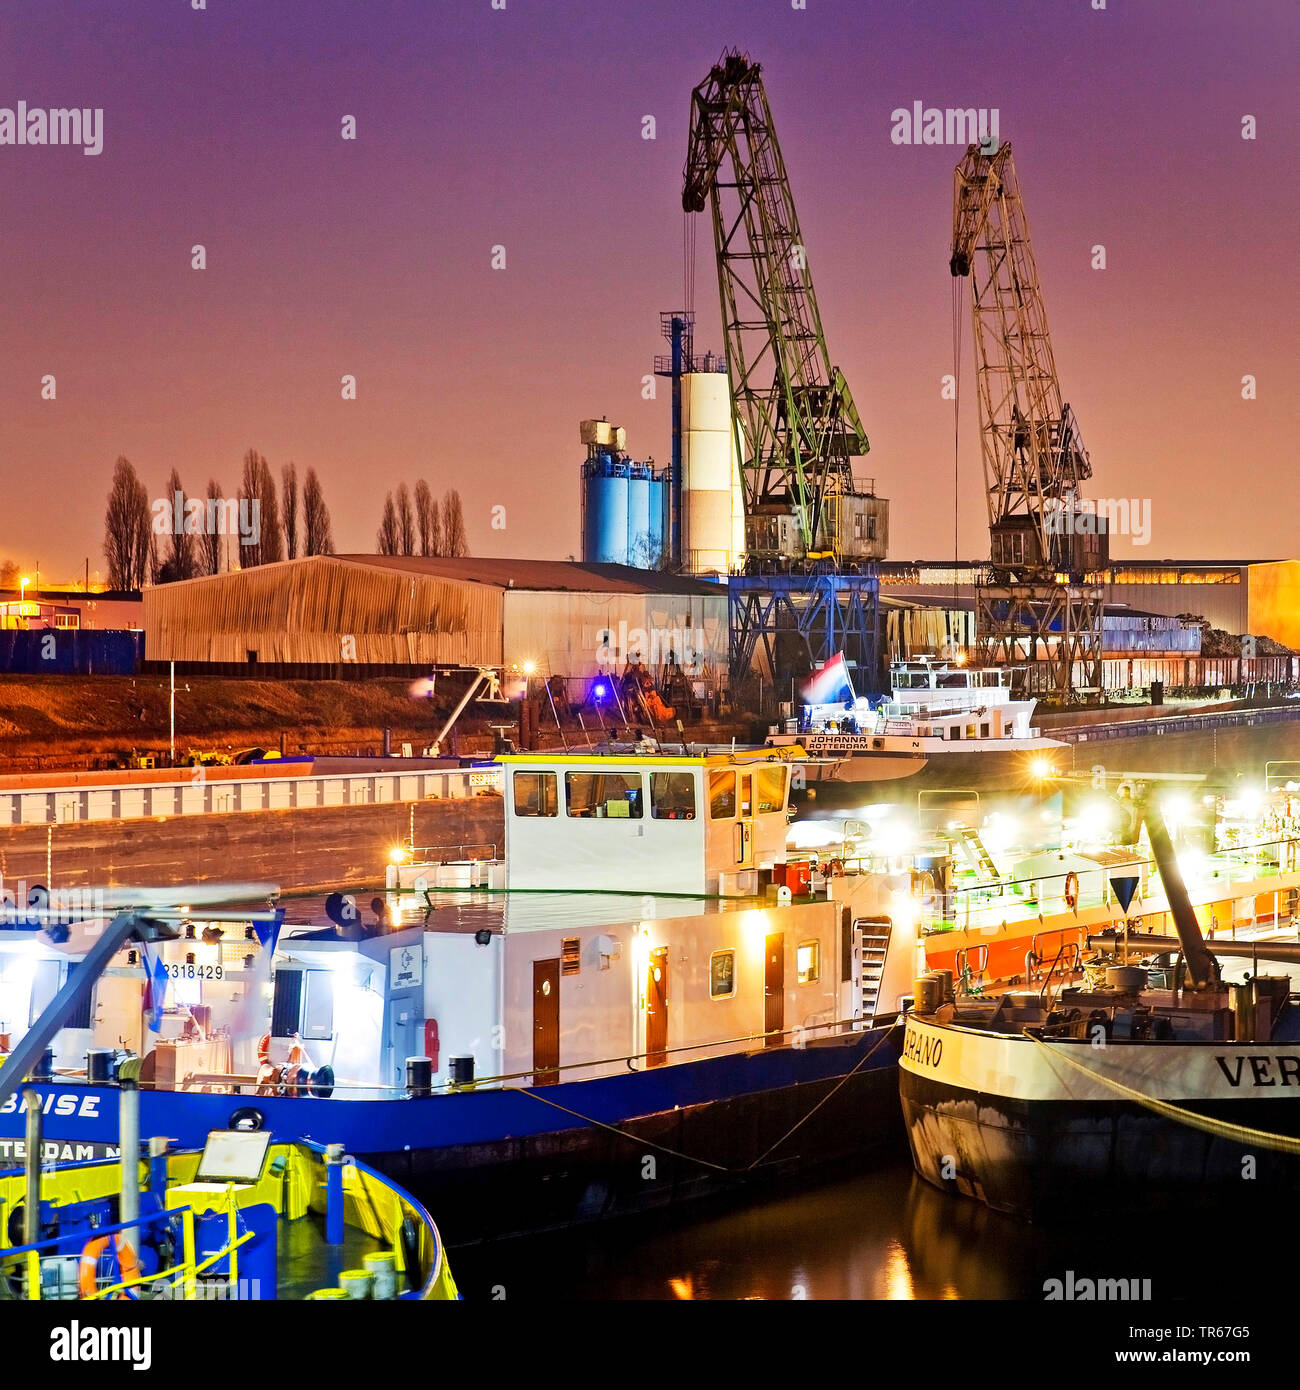 freight ships and cranes in inland port Duisburg at night, Germany, North Rhine-Westphalia, Ruhr Area, Duisburg Stock Photo